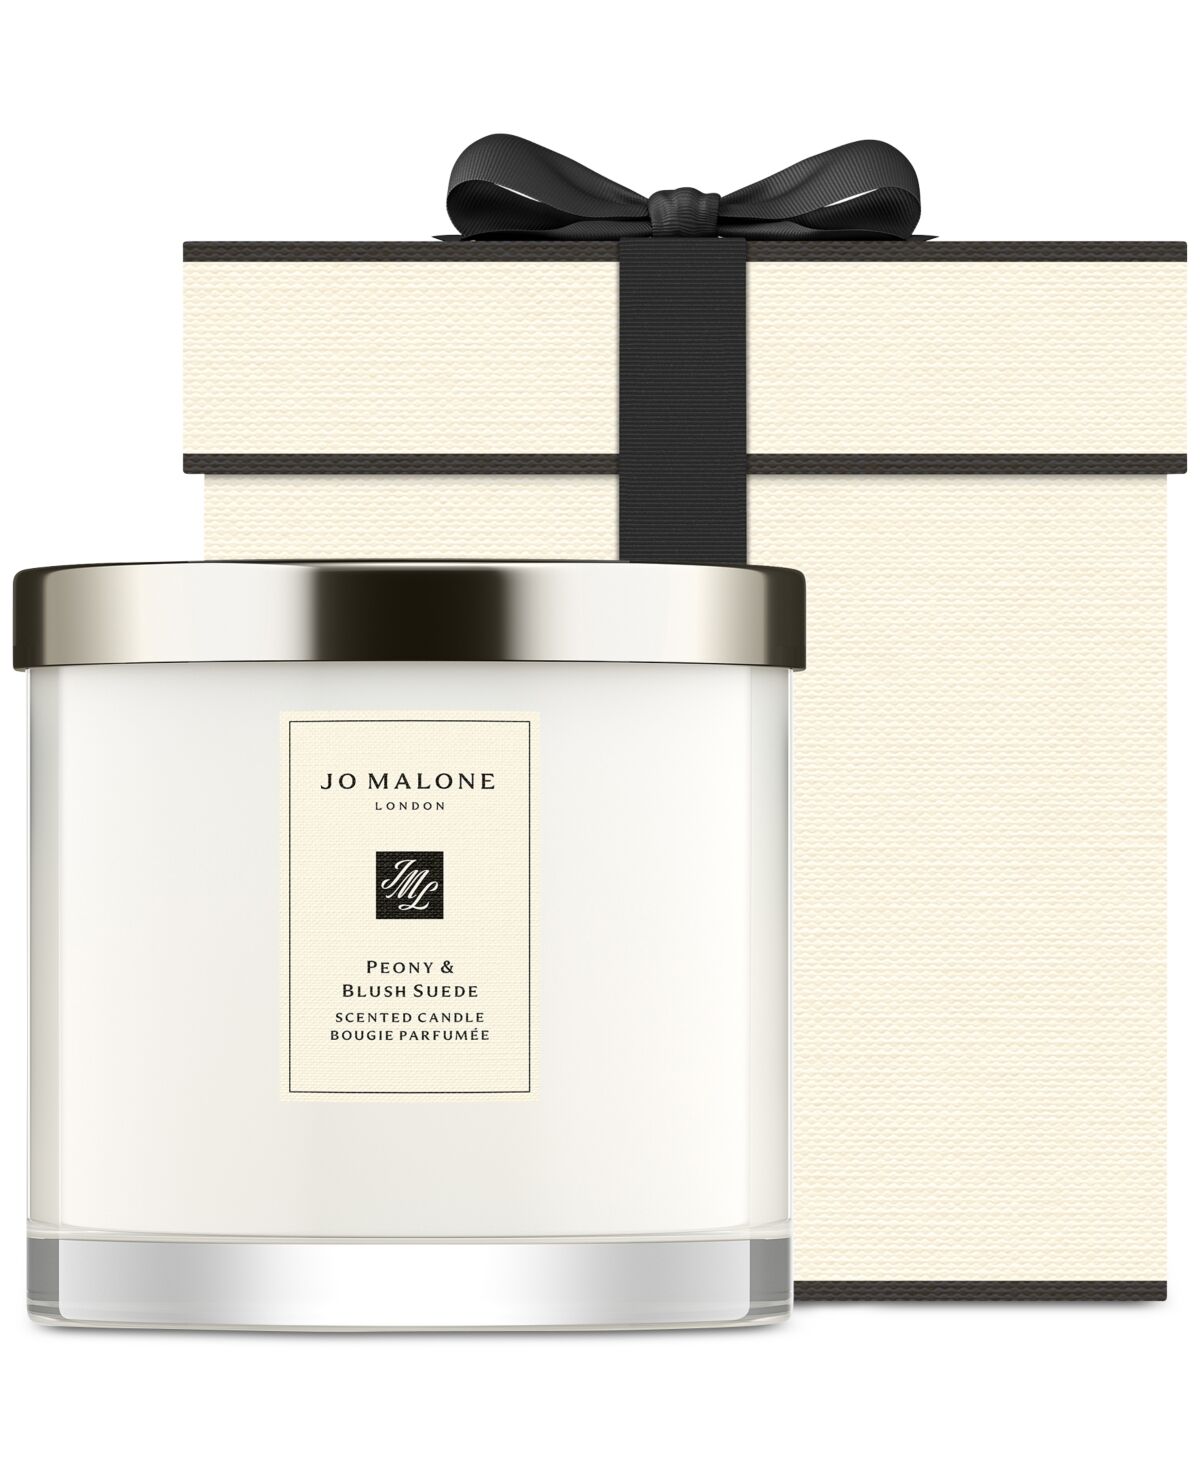 Jo Malone London Peony & Blush Suede Deluxe Candle, 21.2-oz. - Pbs Deluxe Candle Cm/.in